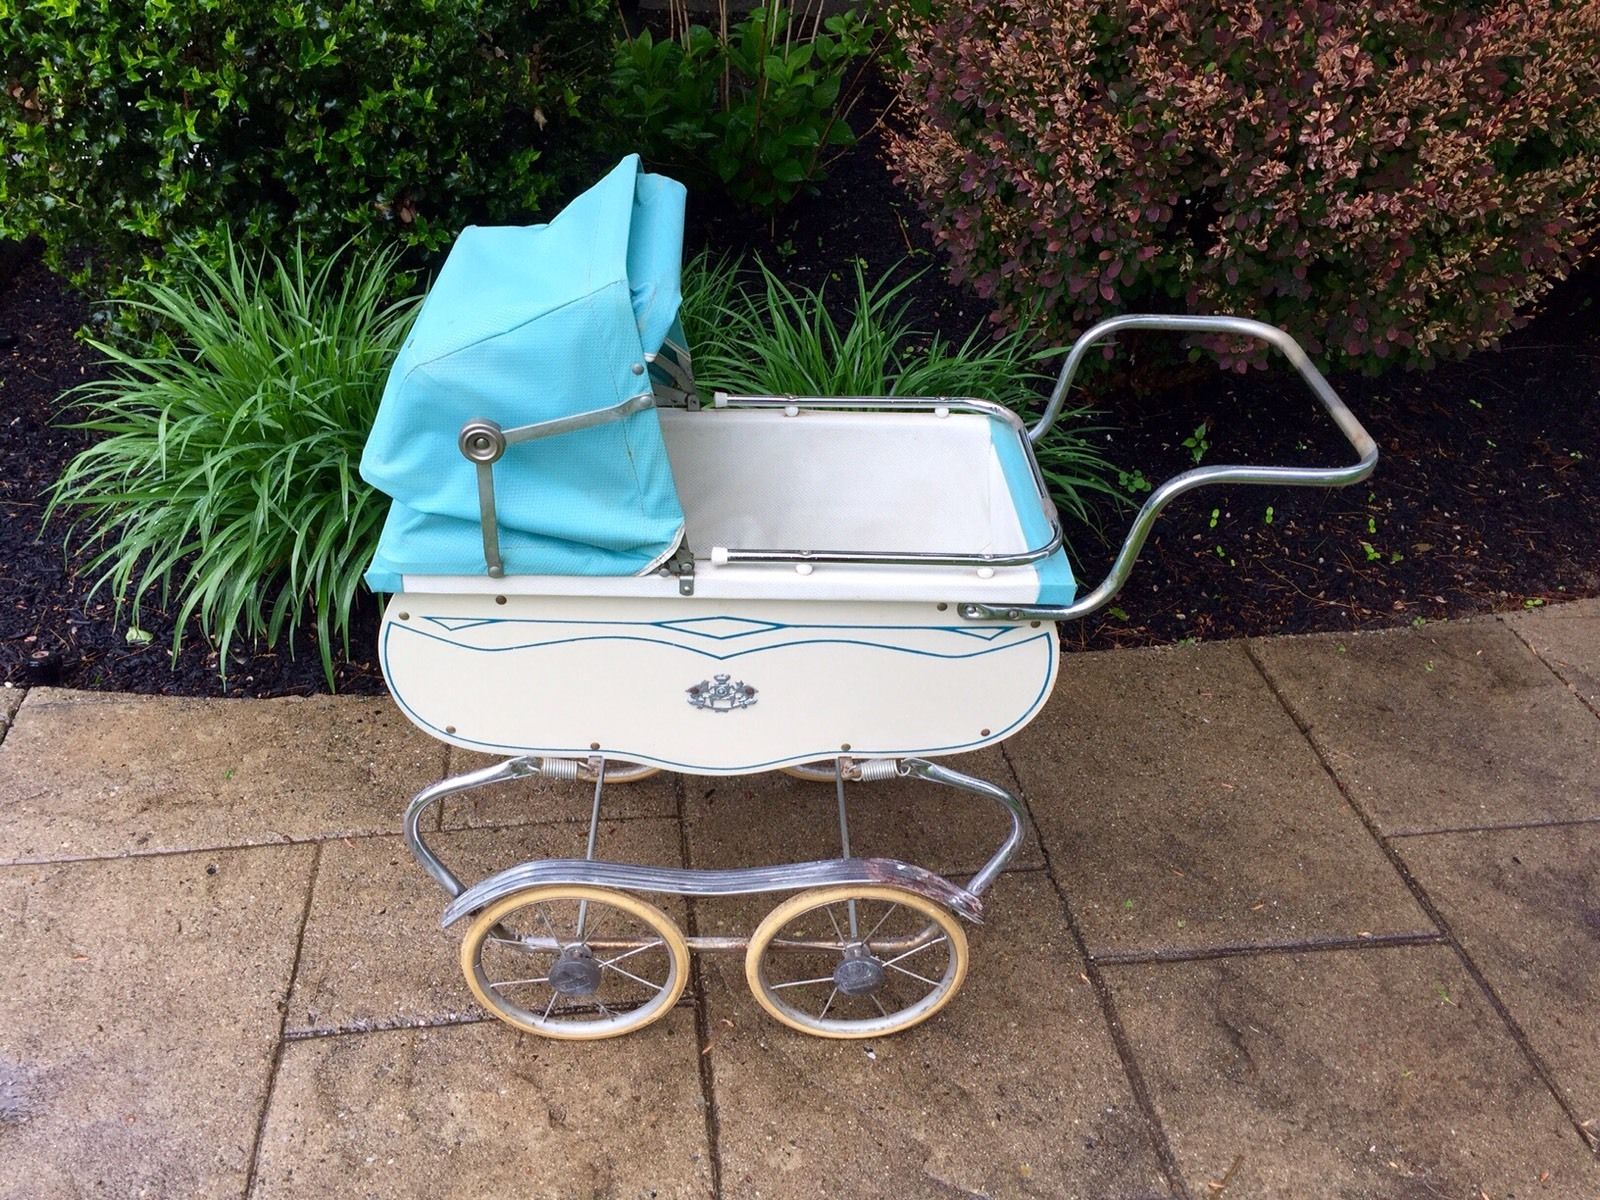 VINTAGE 1950s CORONET BABY DOLL BUGGY CARRIAGE PRAM.  PICK UP ONLY